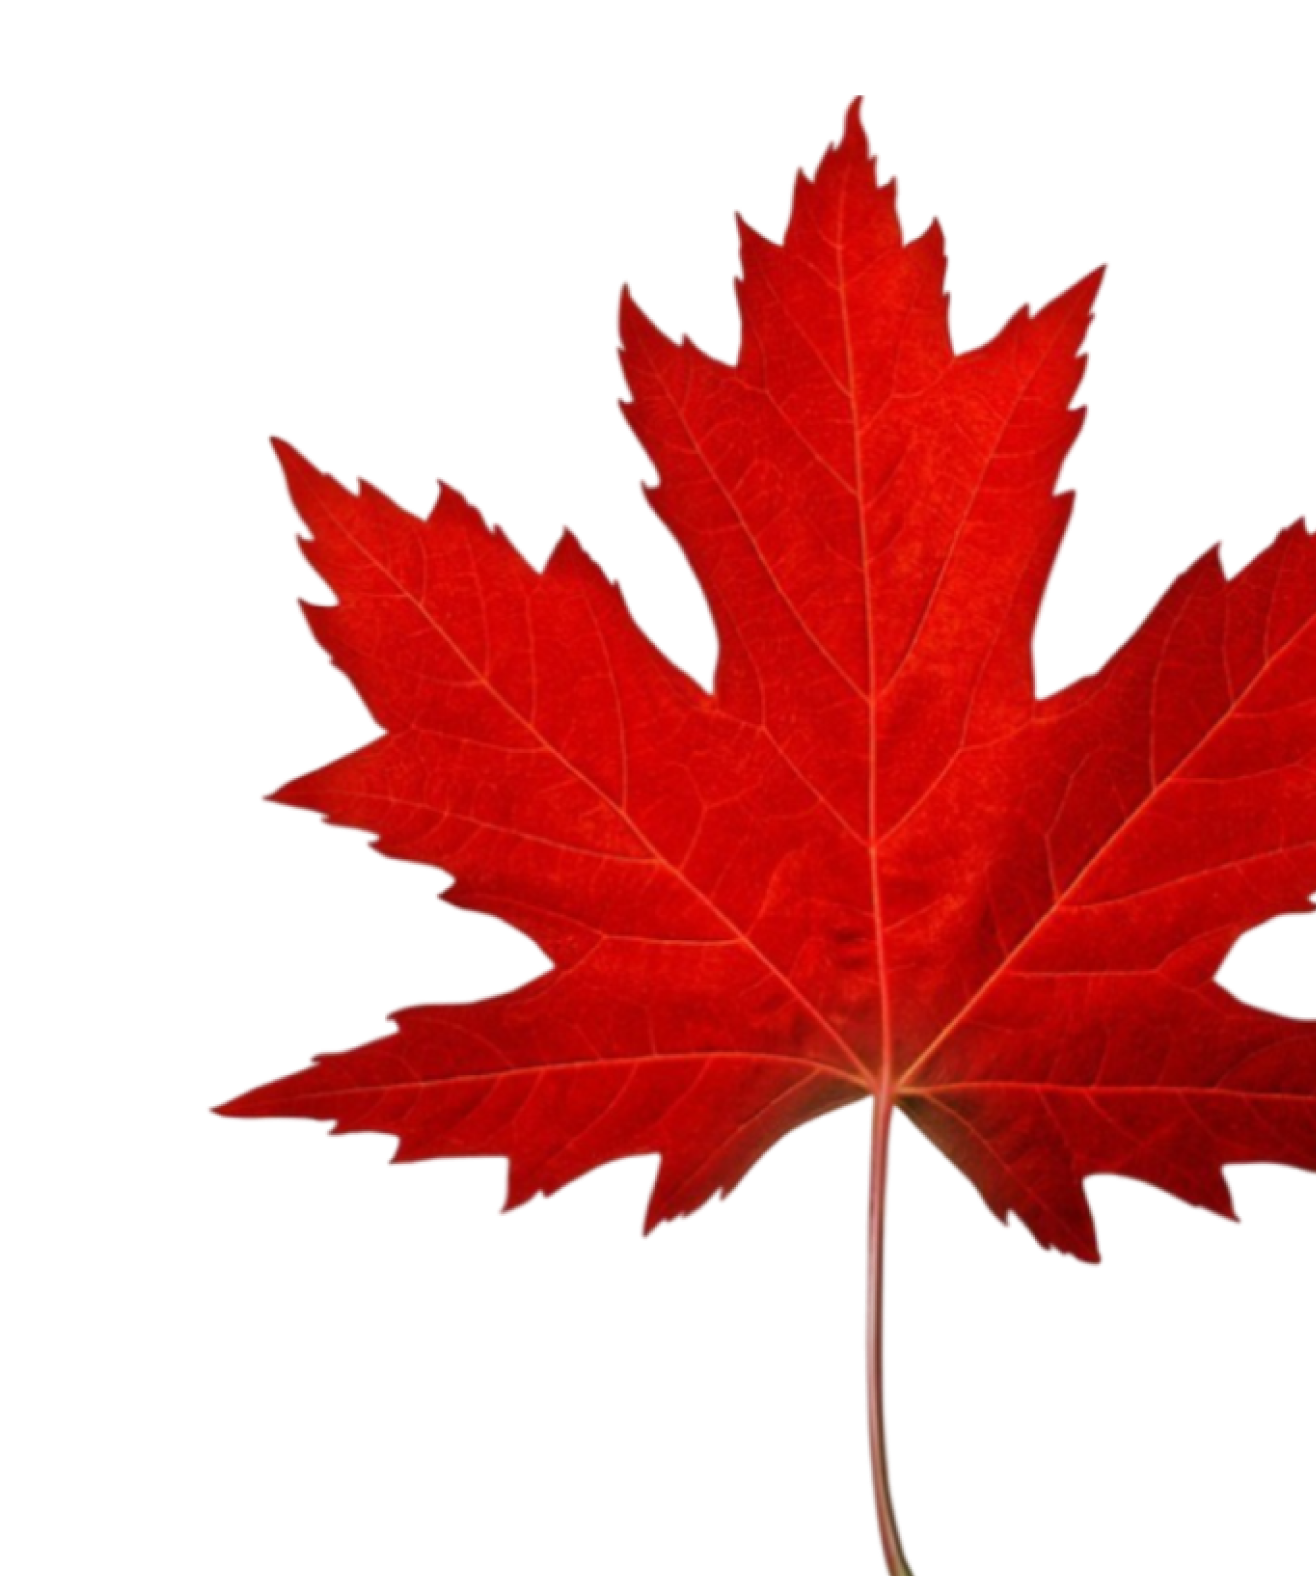 A bright red maple leaf with pointed edges and a visible central stem, isolated on a plain background.